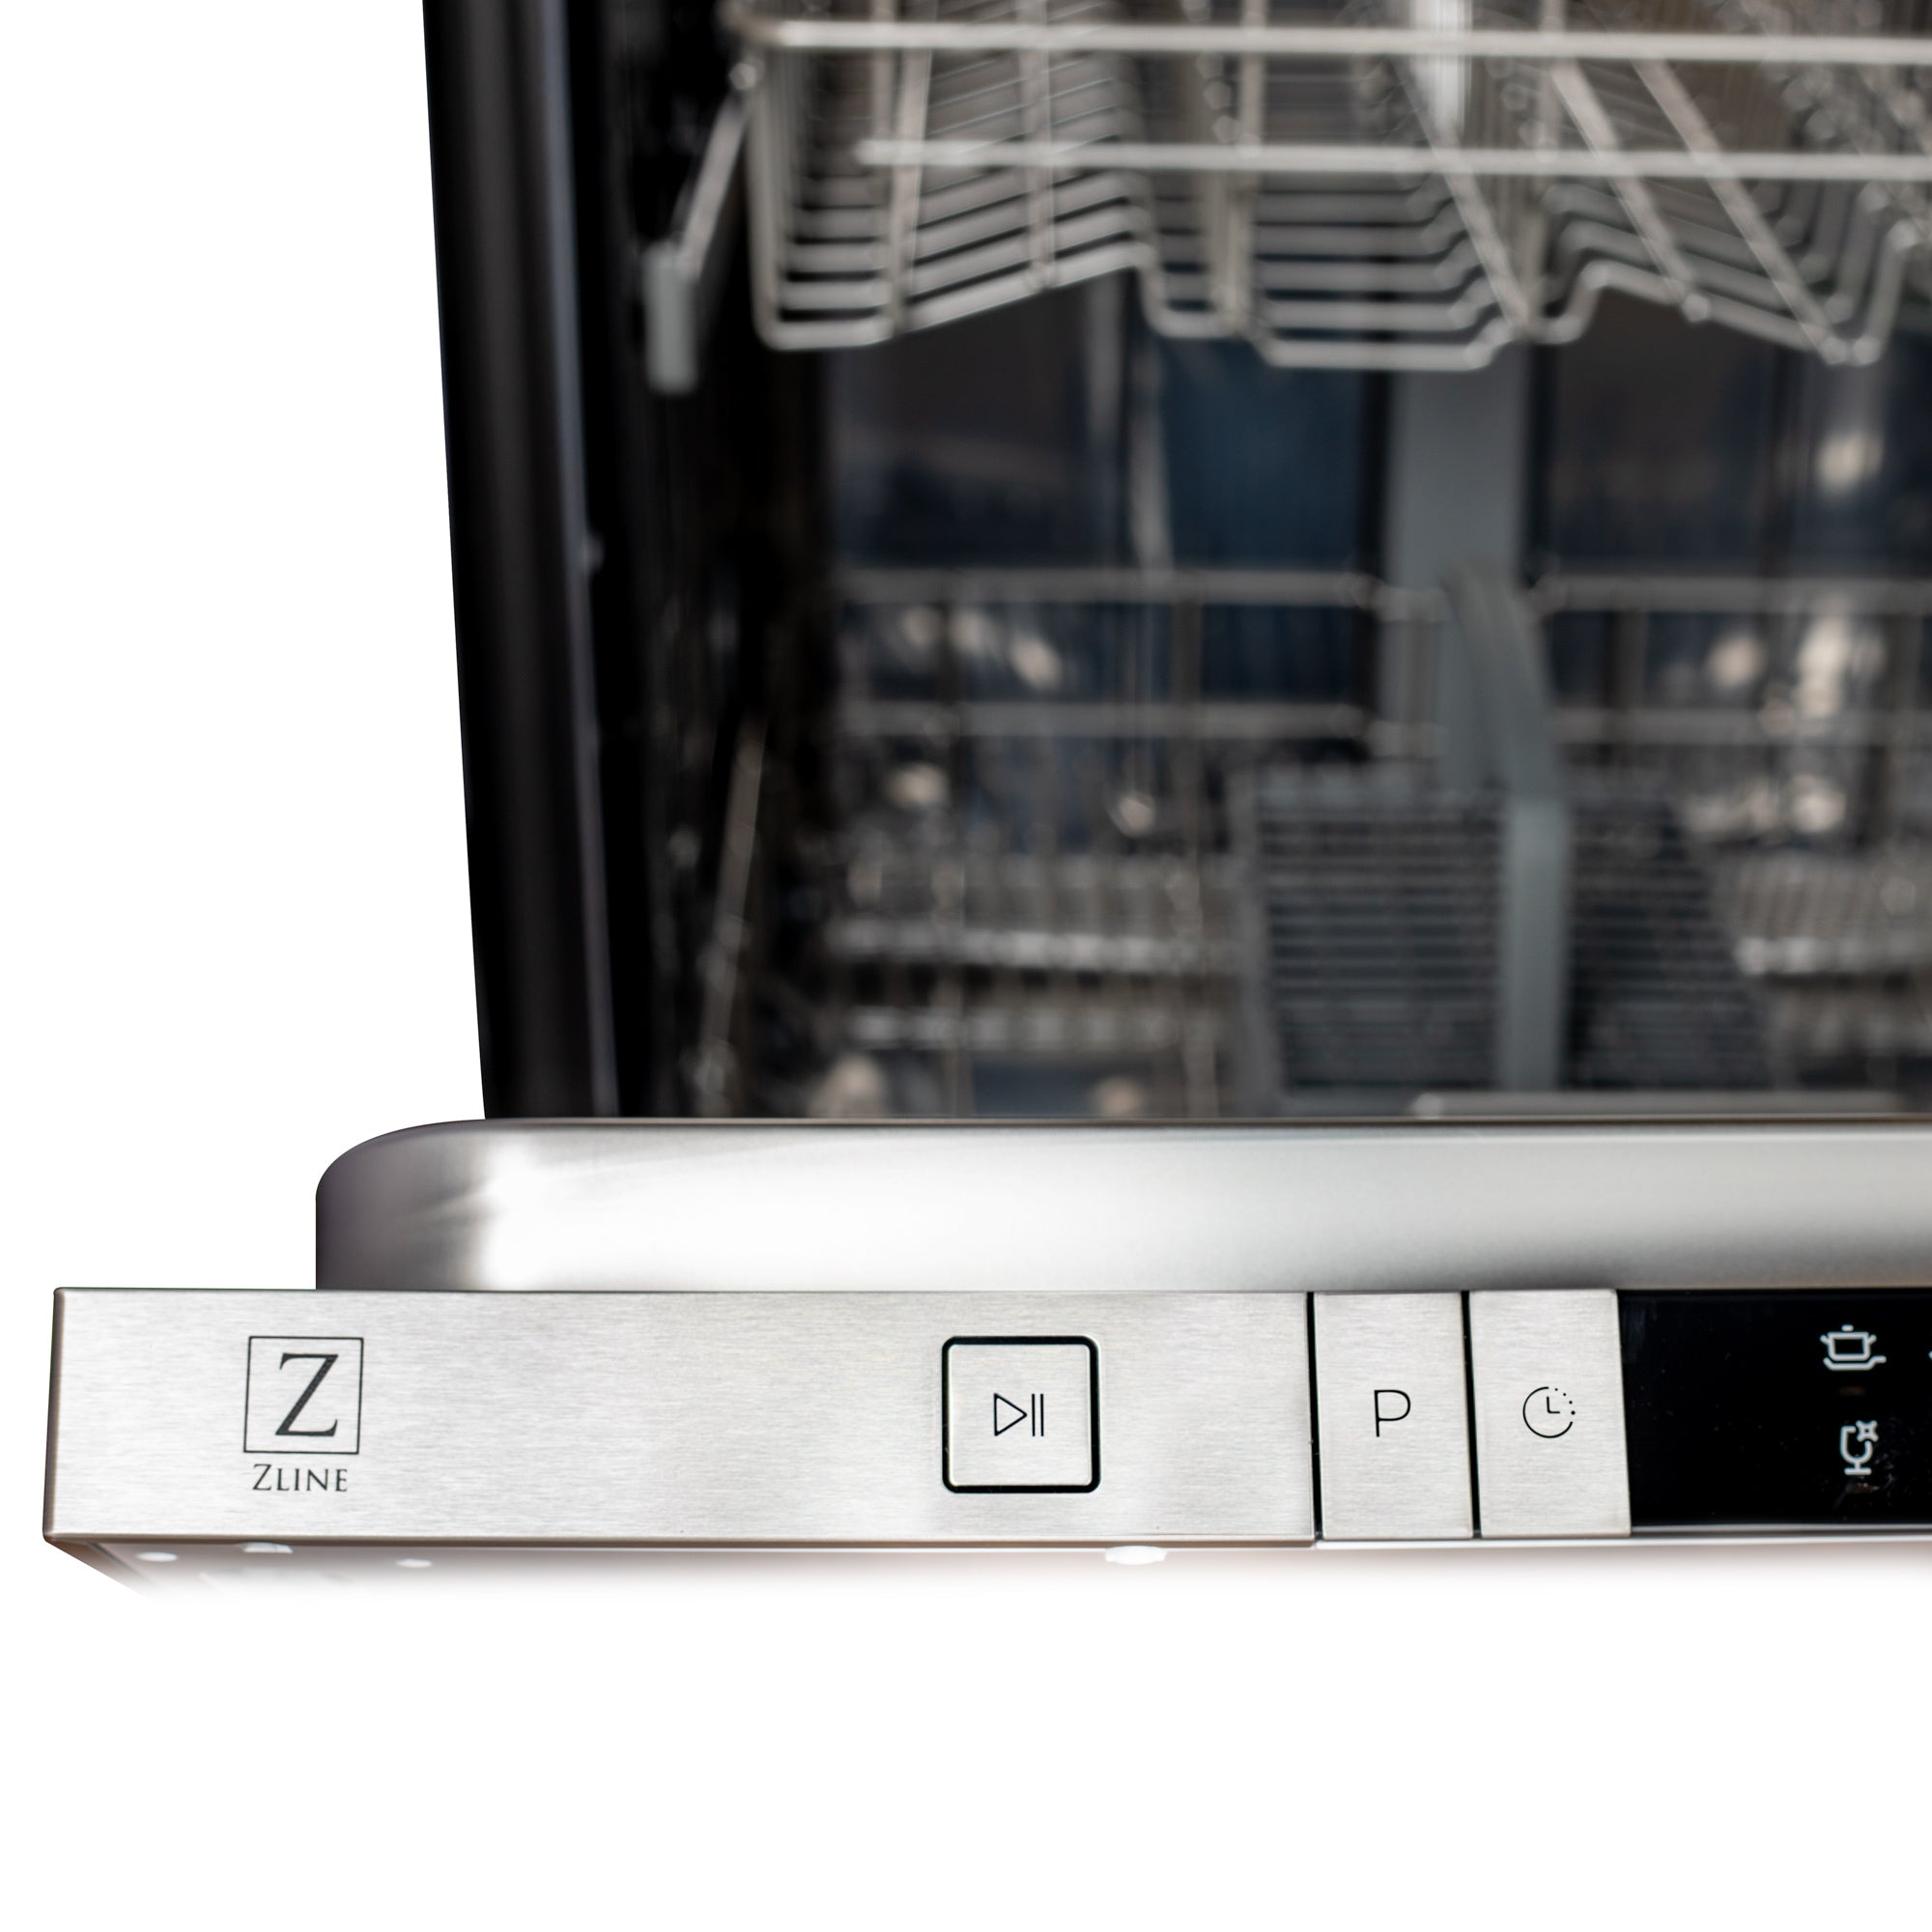 ZLINE 24 in. Blue Gloss Top Control Dishwasher with Stainless Steel Tub and Modern Style Handle, 52dBa (DW-BG-H-24)